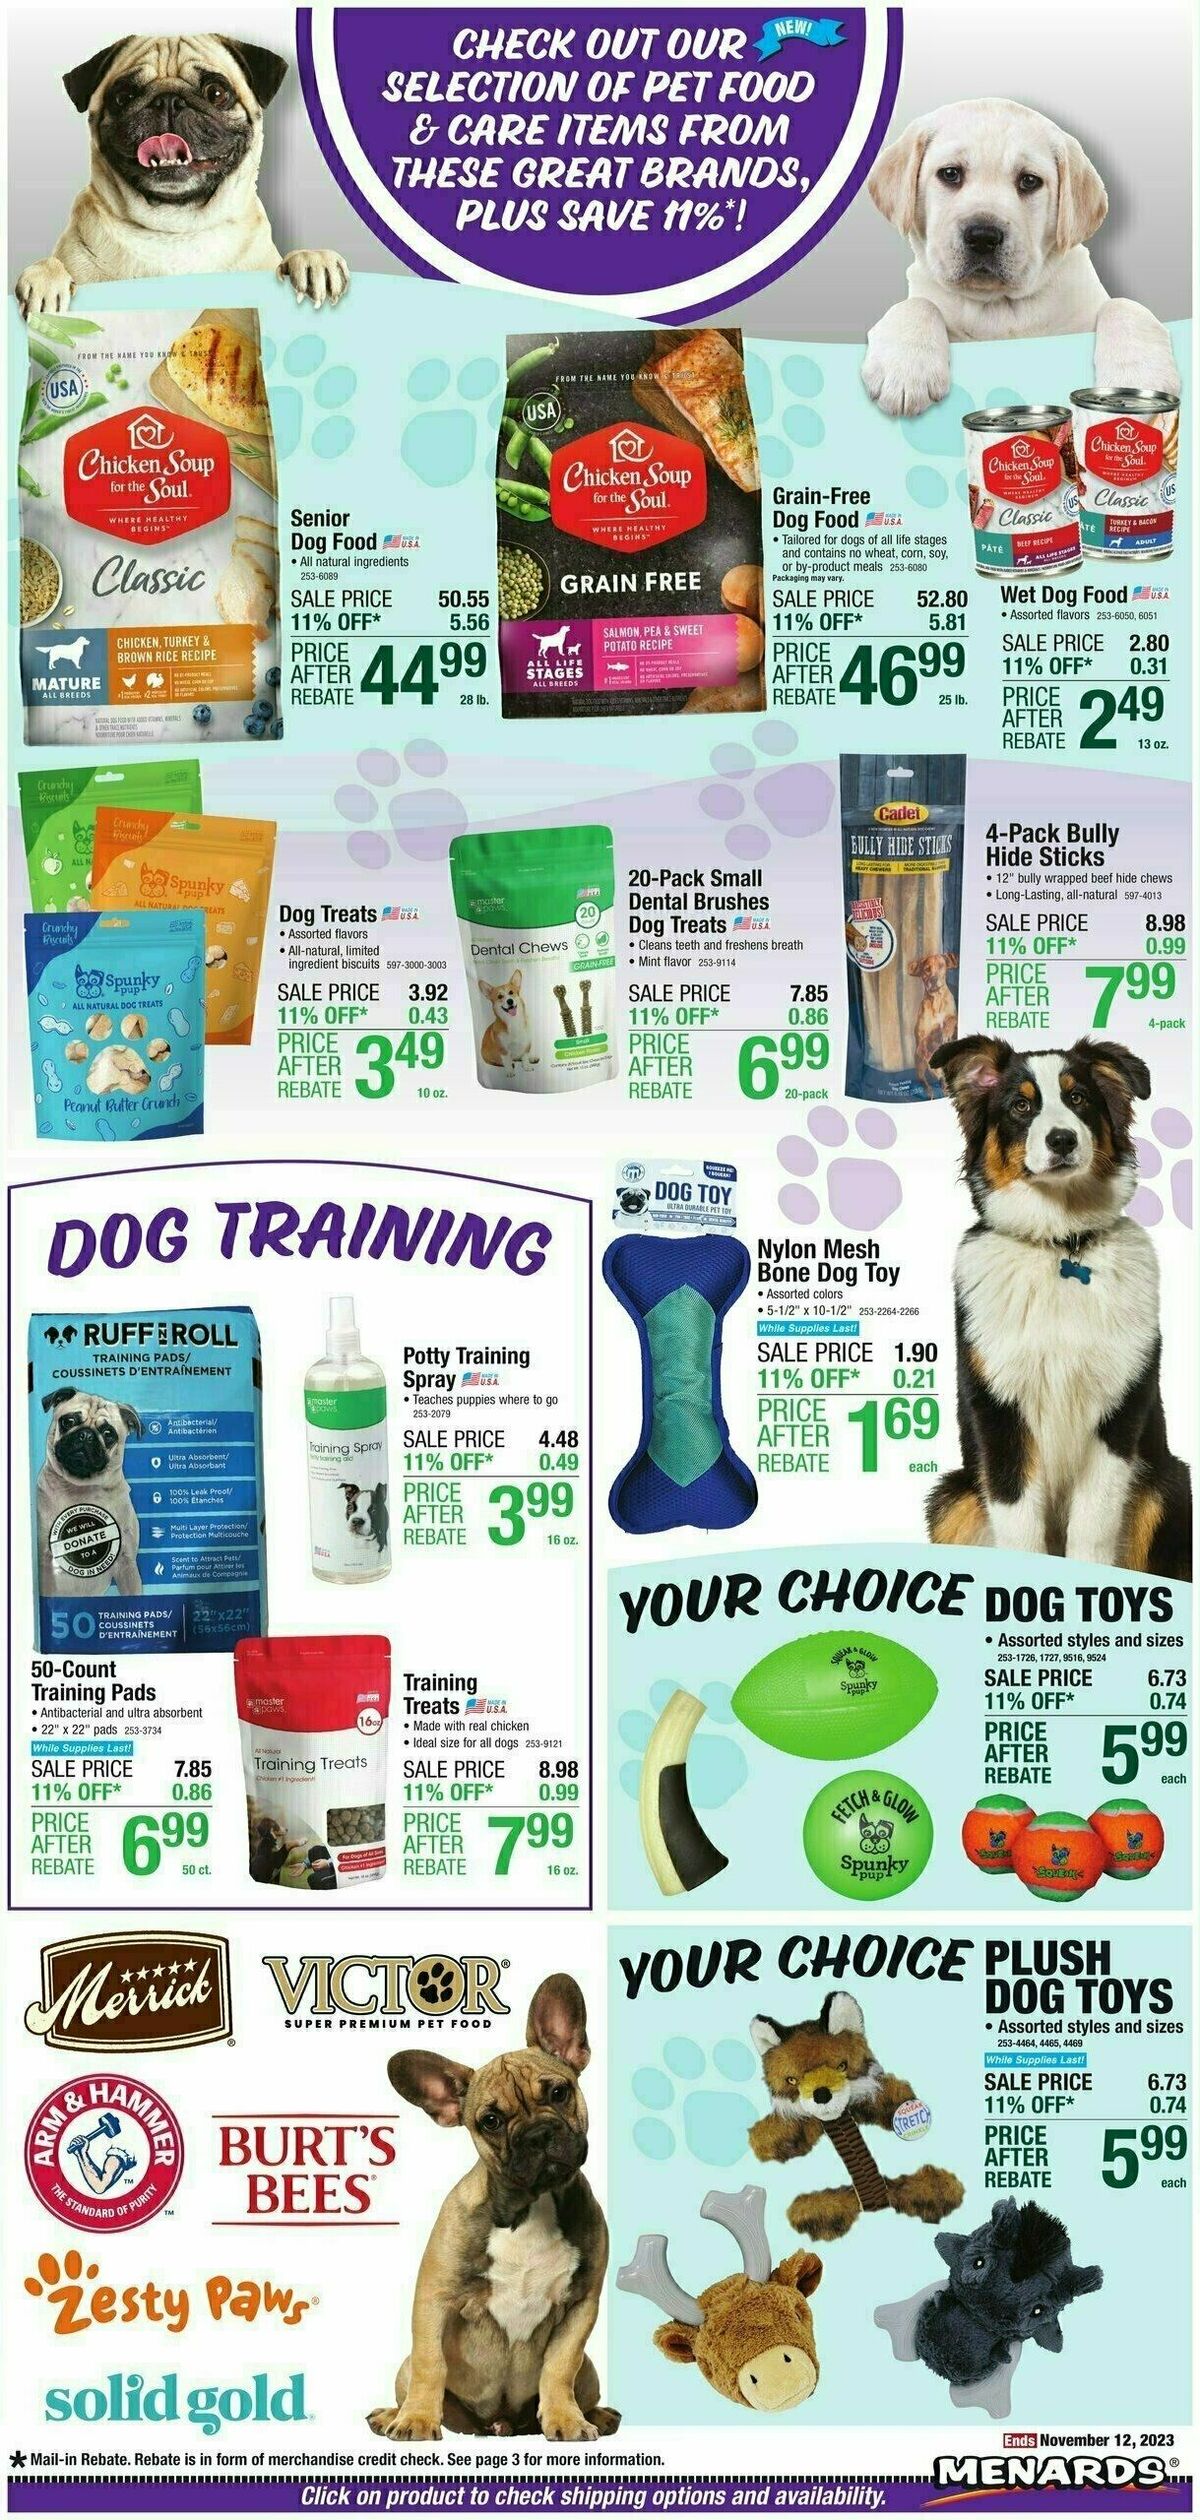 Menards Home Essentials Weekly Ad from November 1